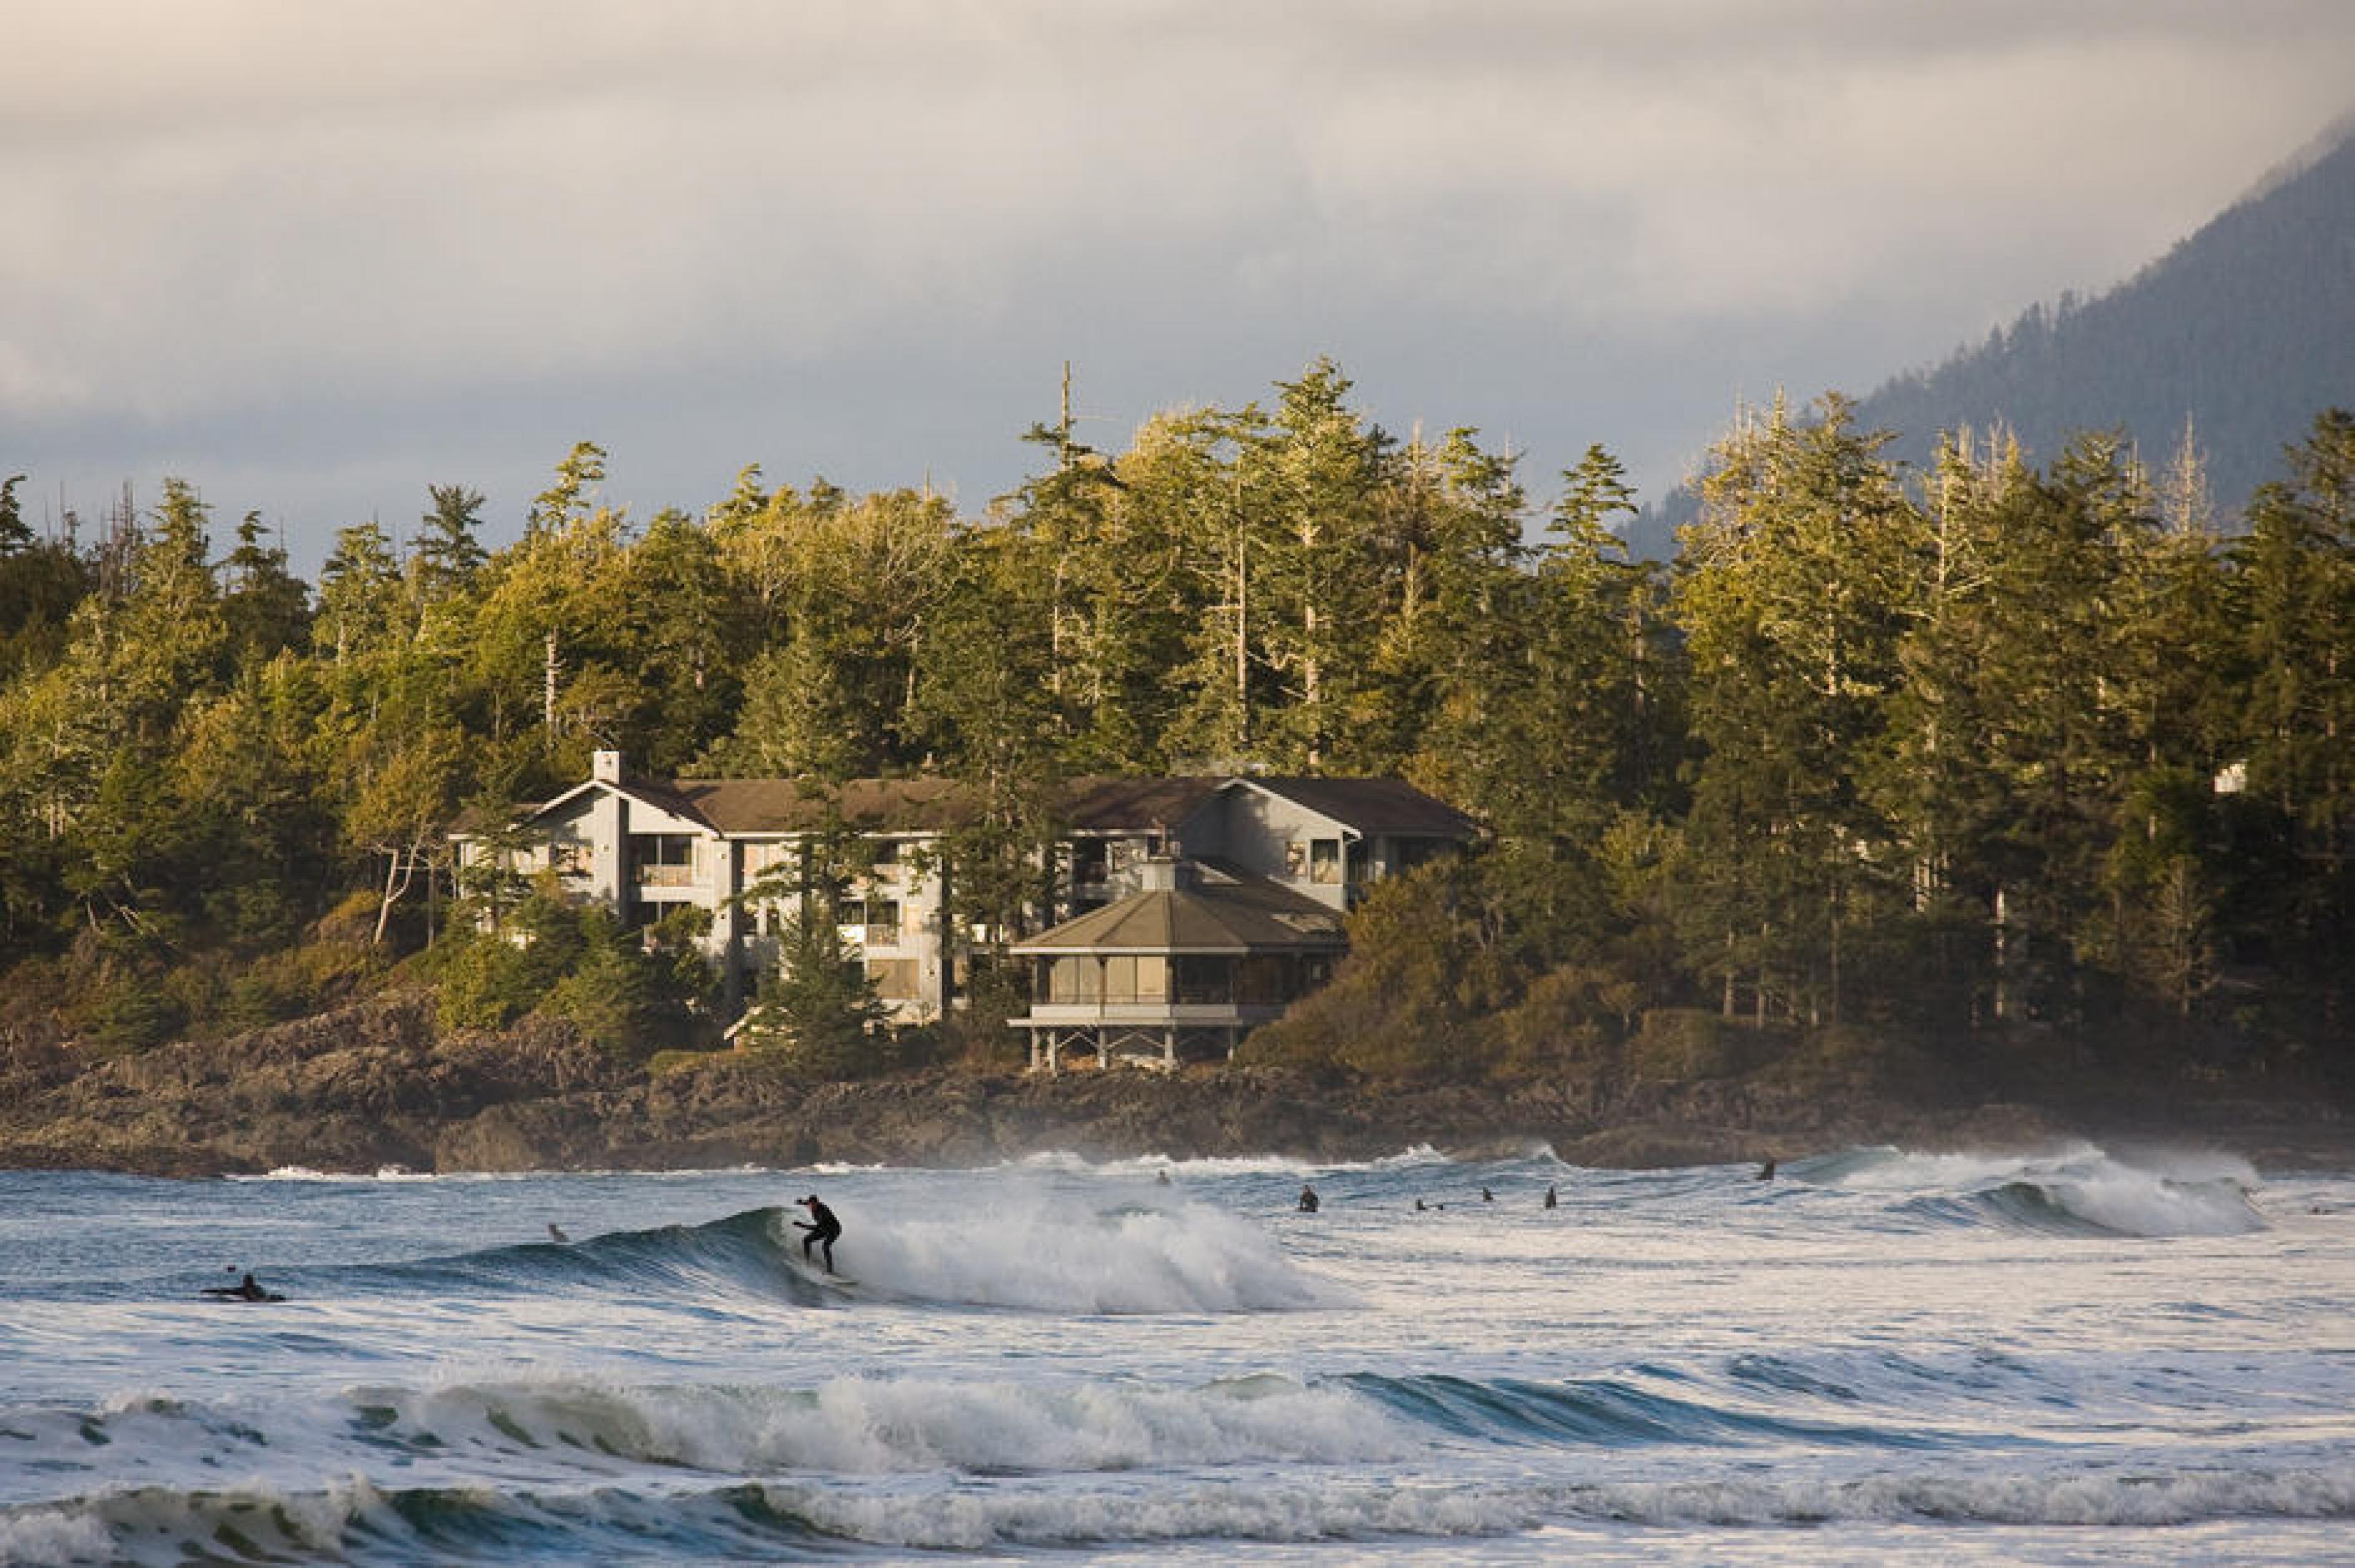 Surf and The Pointe Wayne Barnes at Wickaninnish Inn, Vancouver Island, Canada